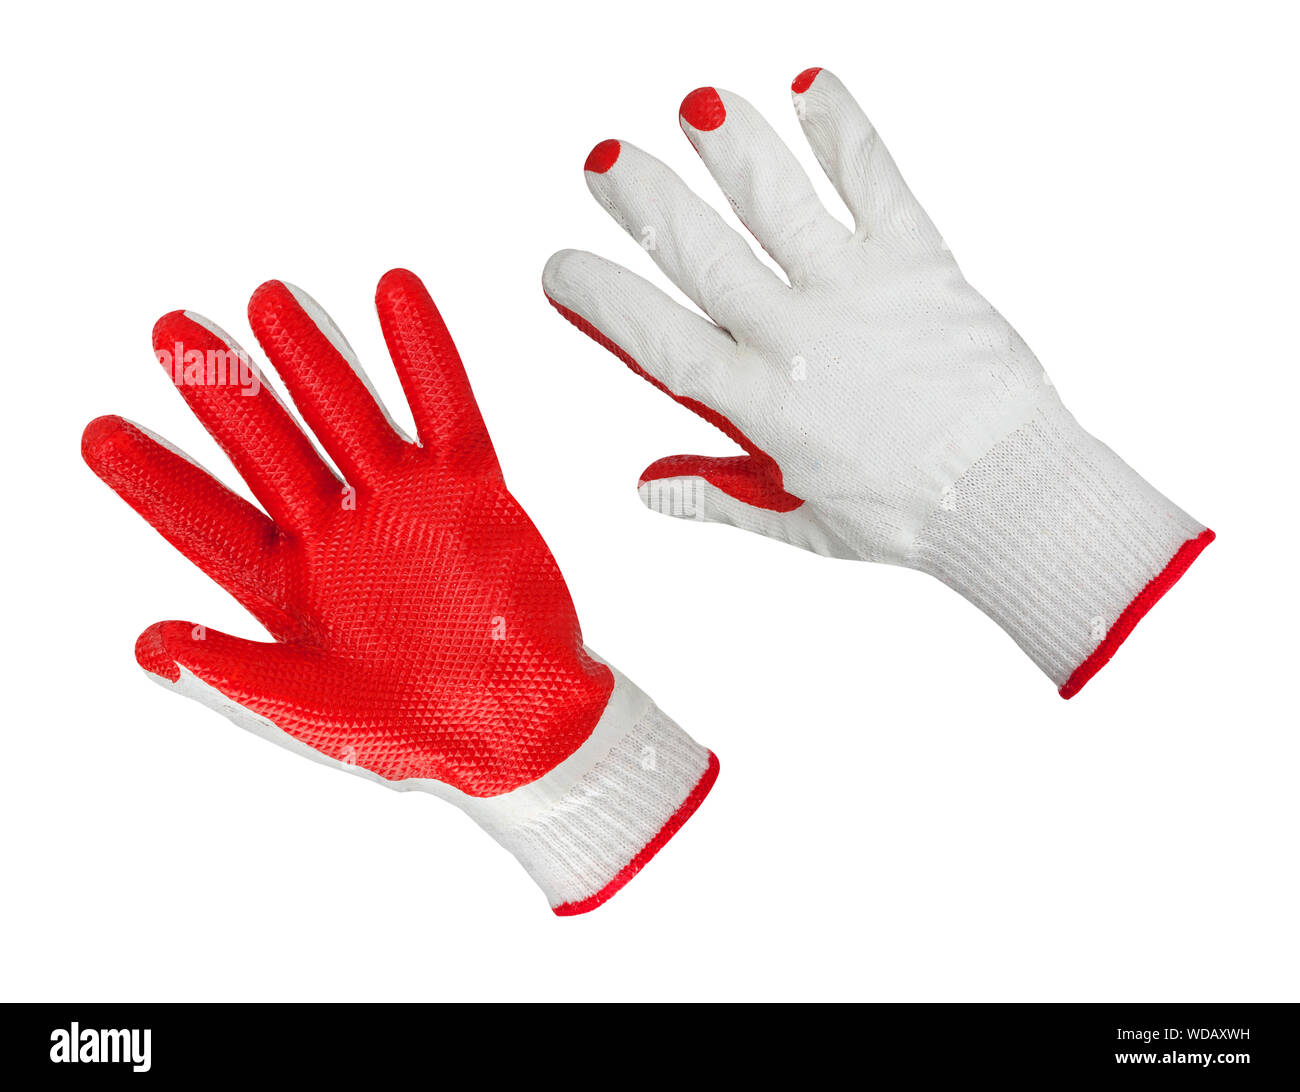 Cotton gloves with red rubber on white background. Safety gloves isolated on white background. Protective worker gloves Stock Photo